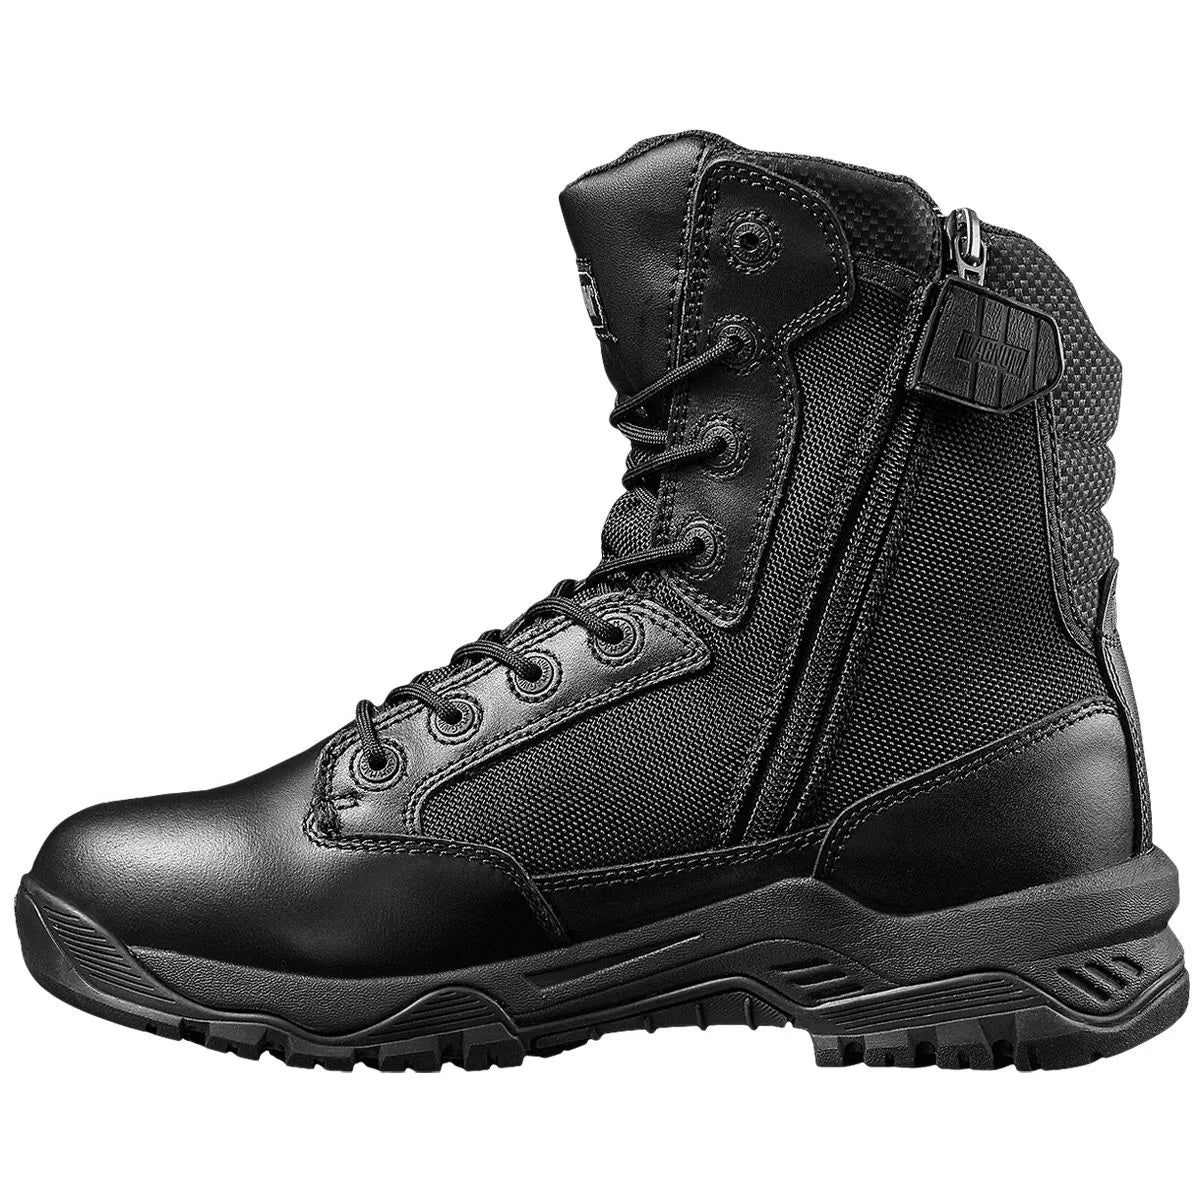 Magnum Tactical Boots - Fast-wicking lining for moisture management and comfort during extreme situations.